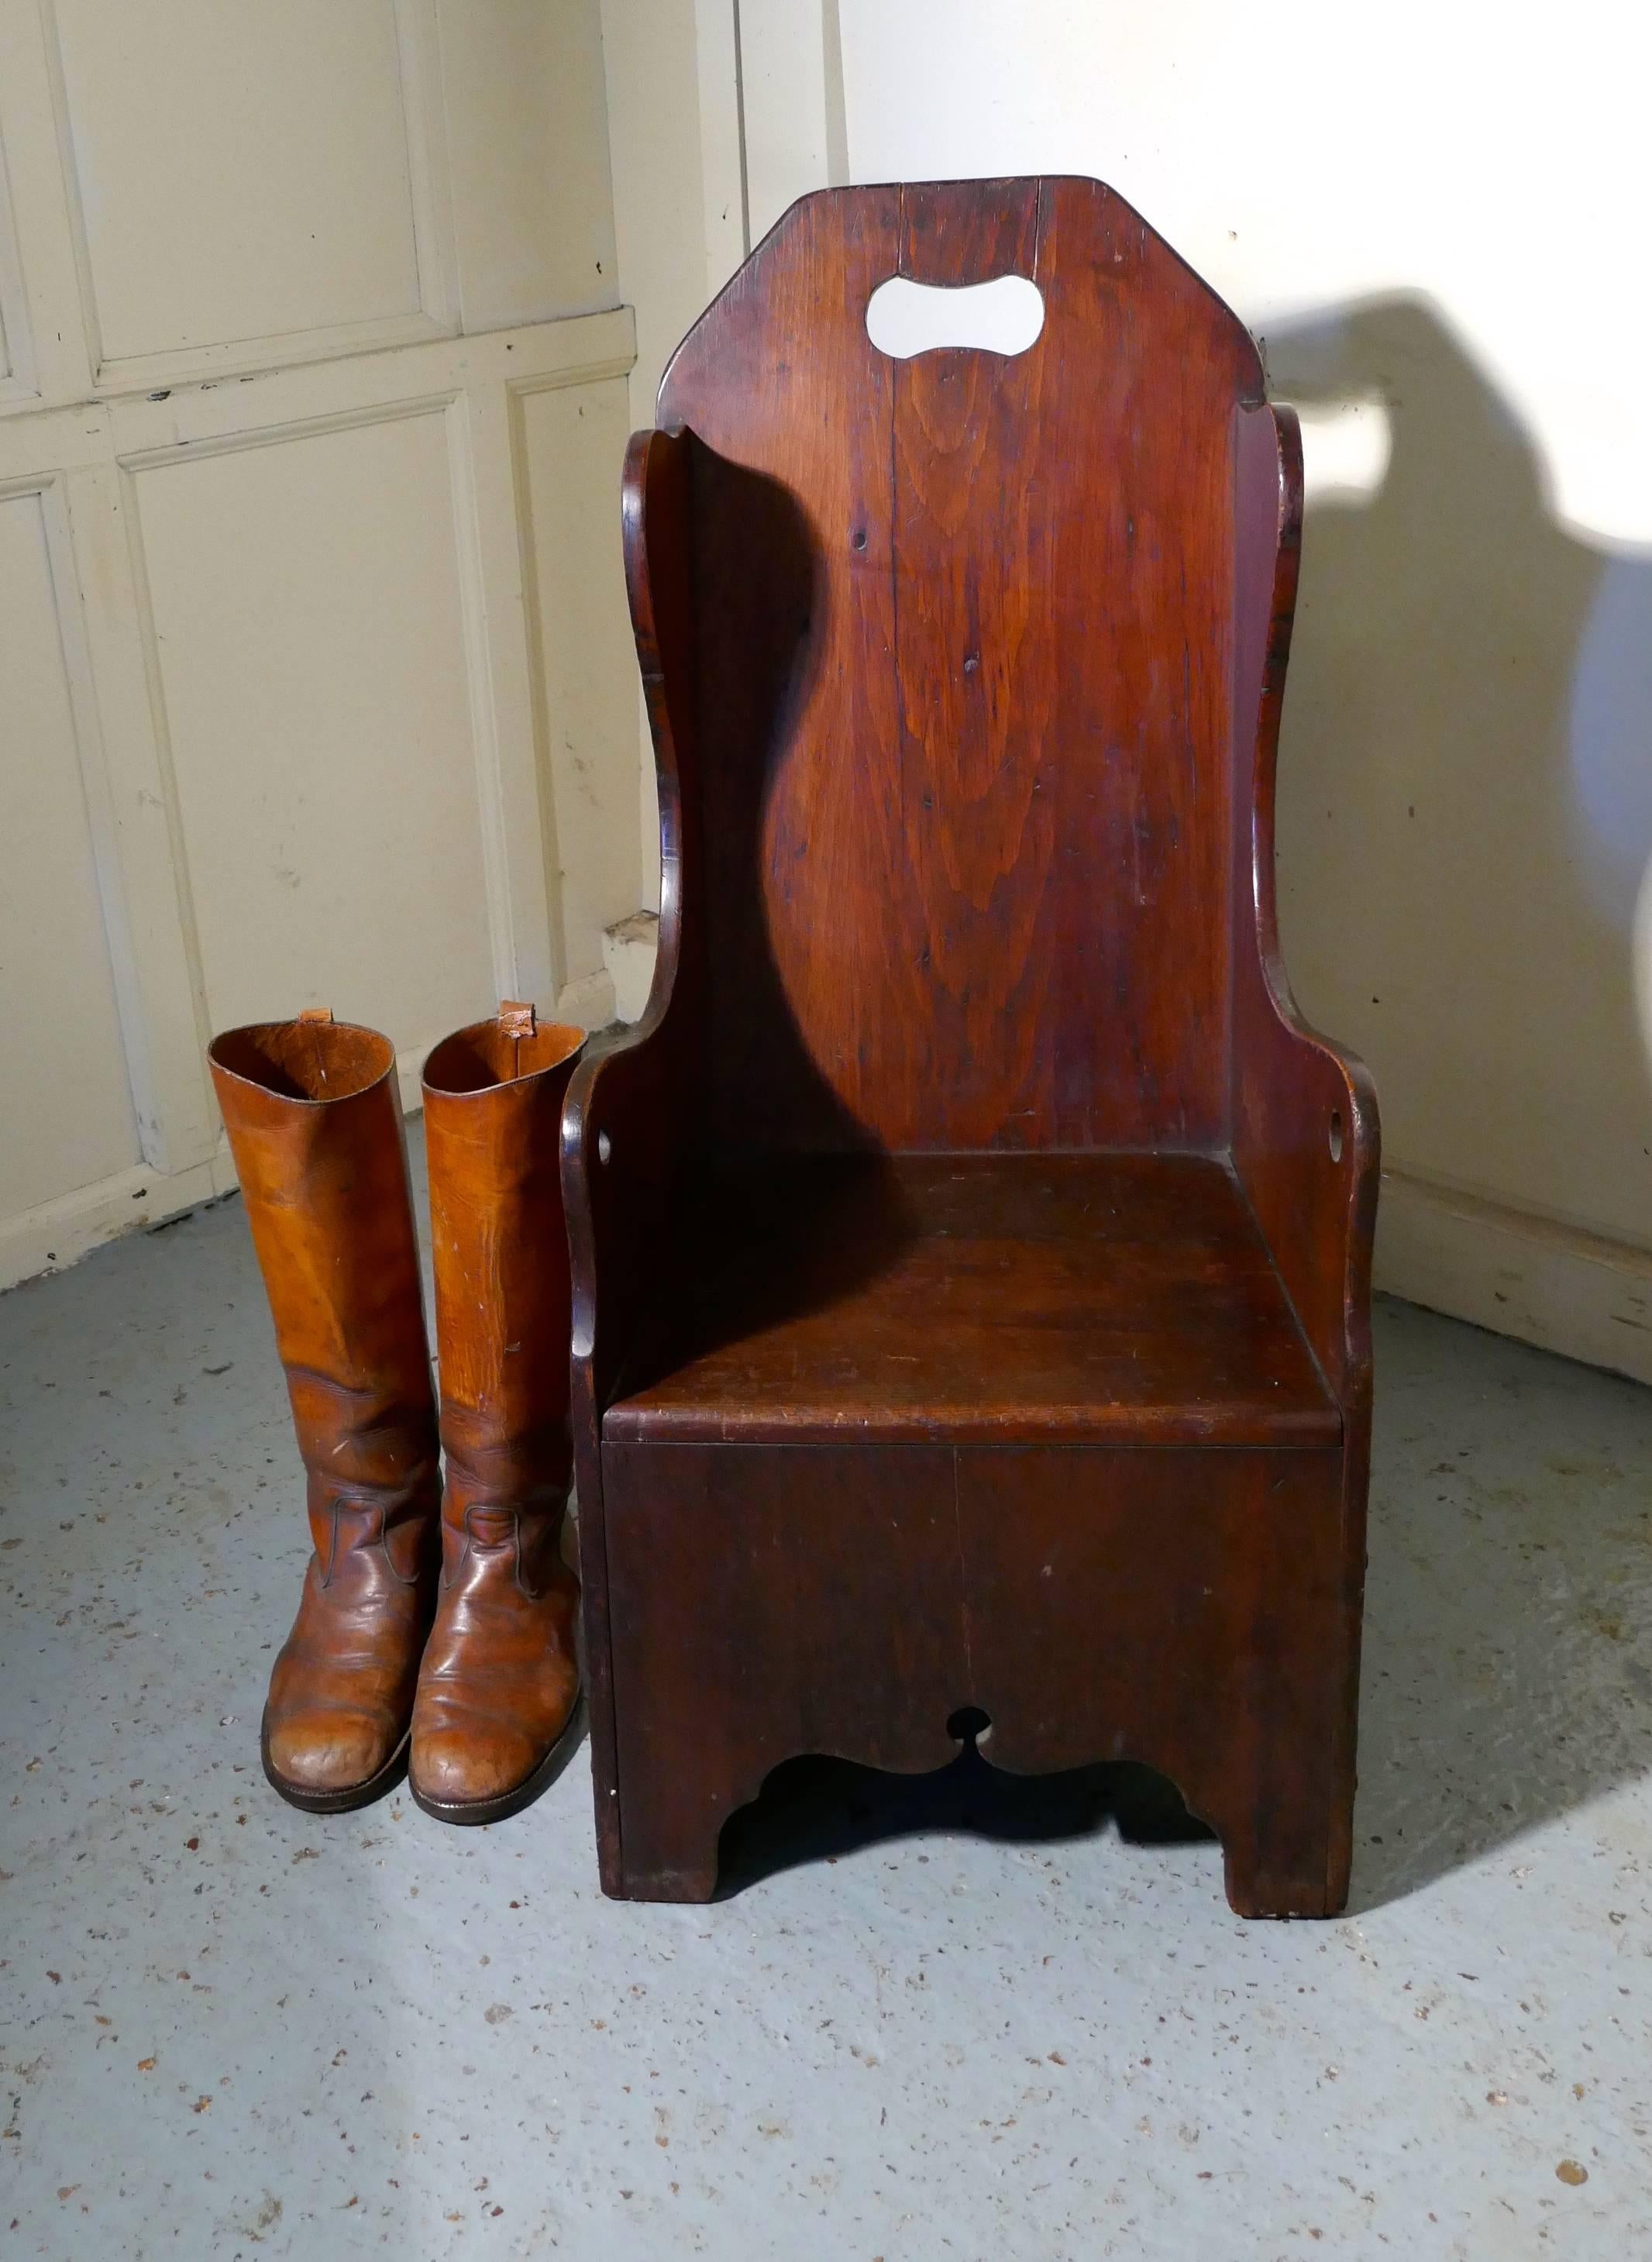 Primitive 19th century American pine Childs Country chair

This a rare piece, made in America a primitive 19th century upright child’s chair, the chair has shaped sides and arched back with a pierced hand hold. The chair is made in age darkened